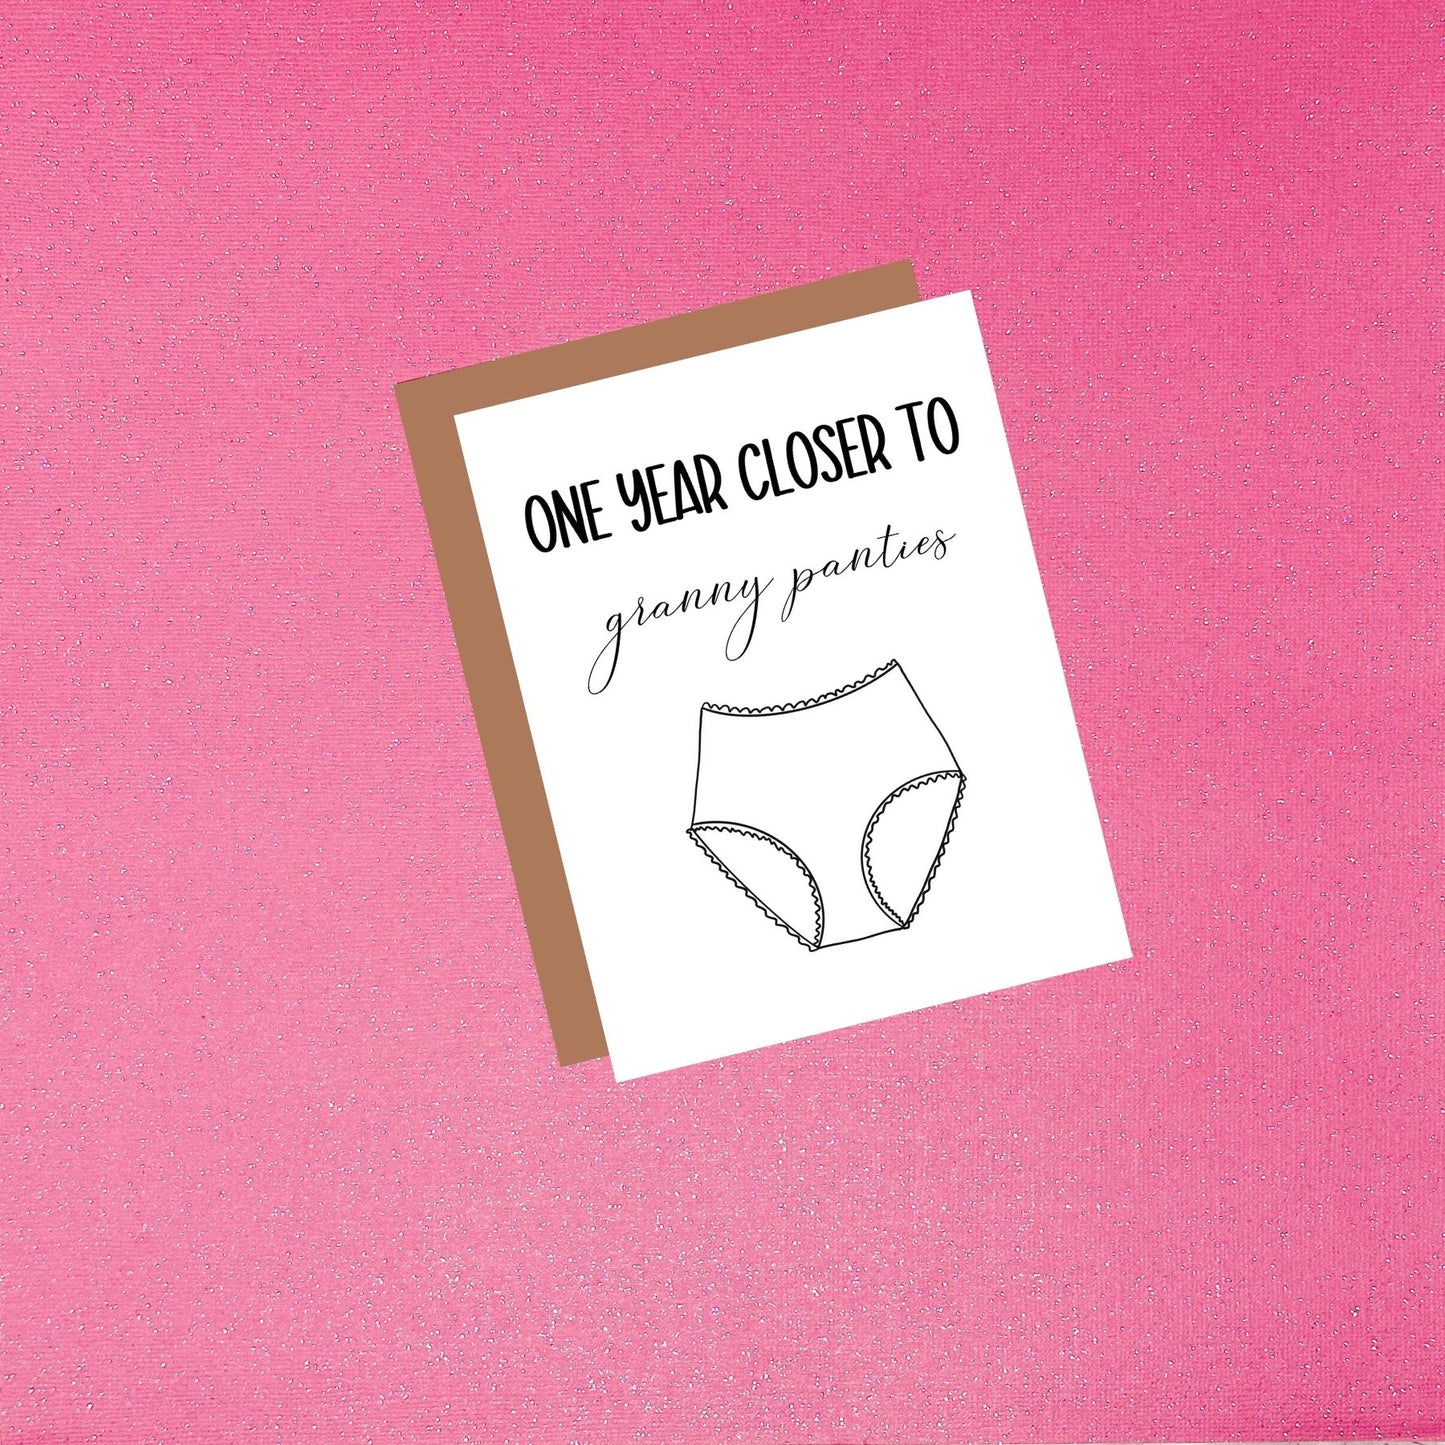 One Year Closer To Granny Panties | Funny Birthday Greeting Card For Her